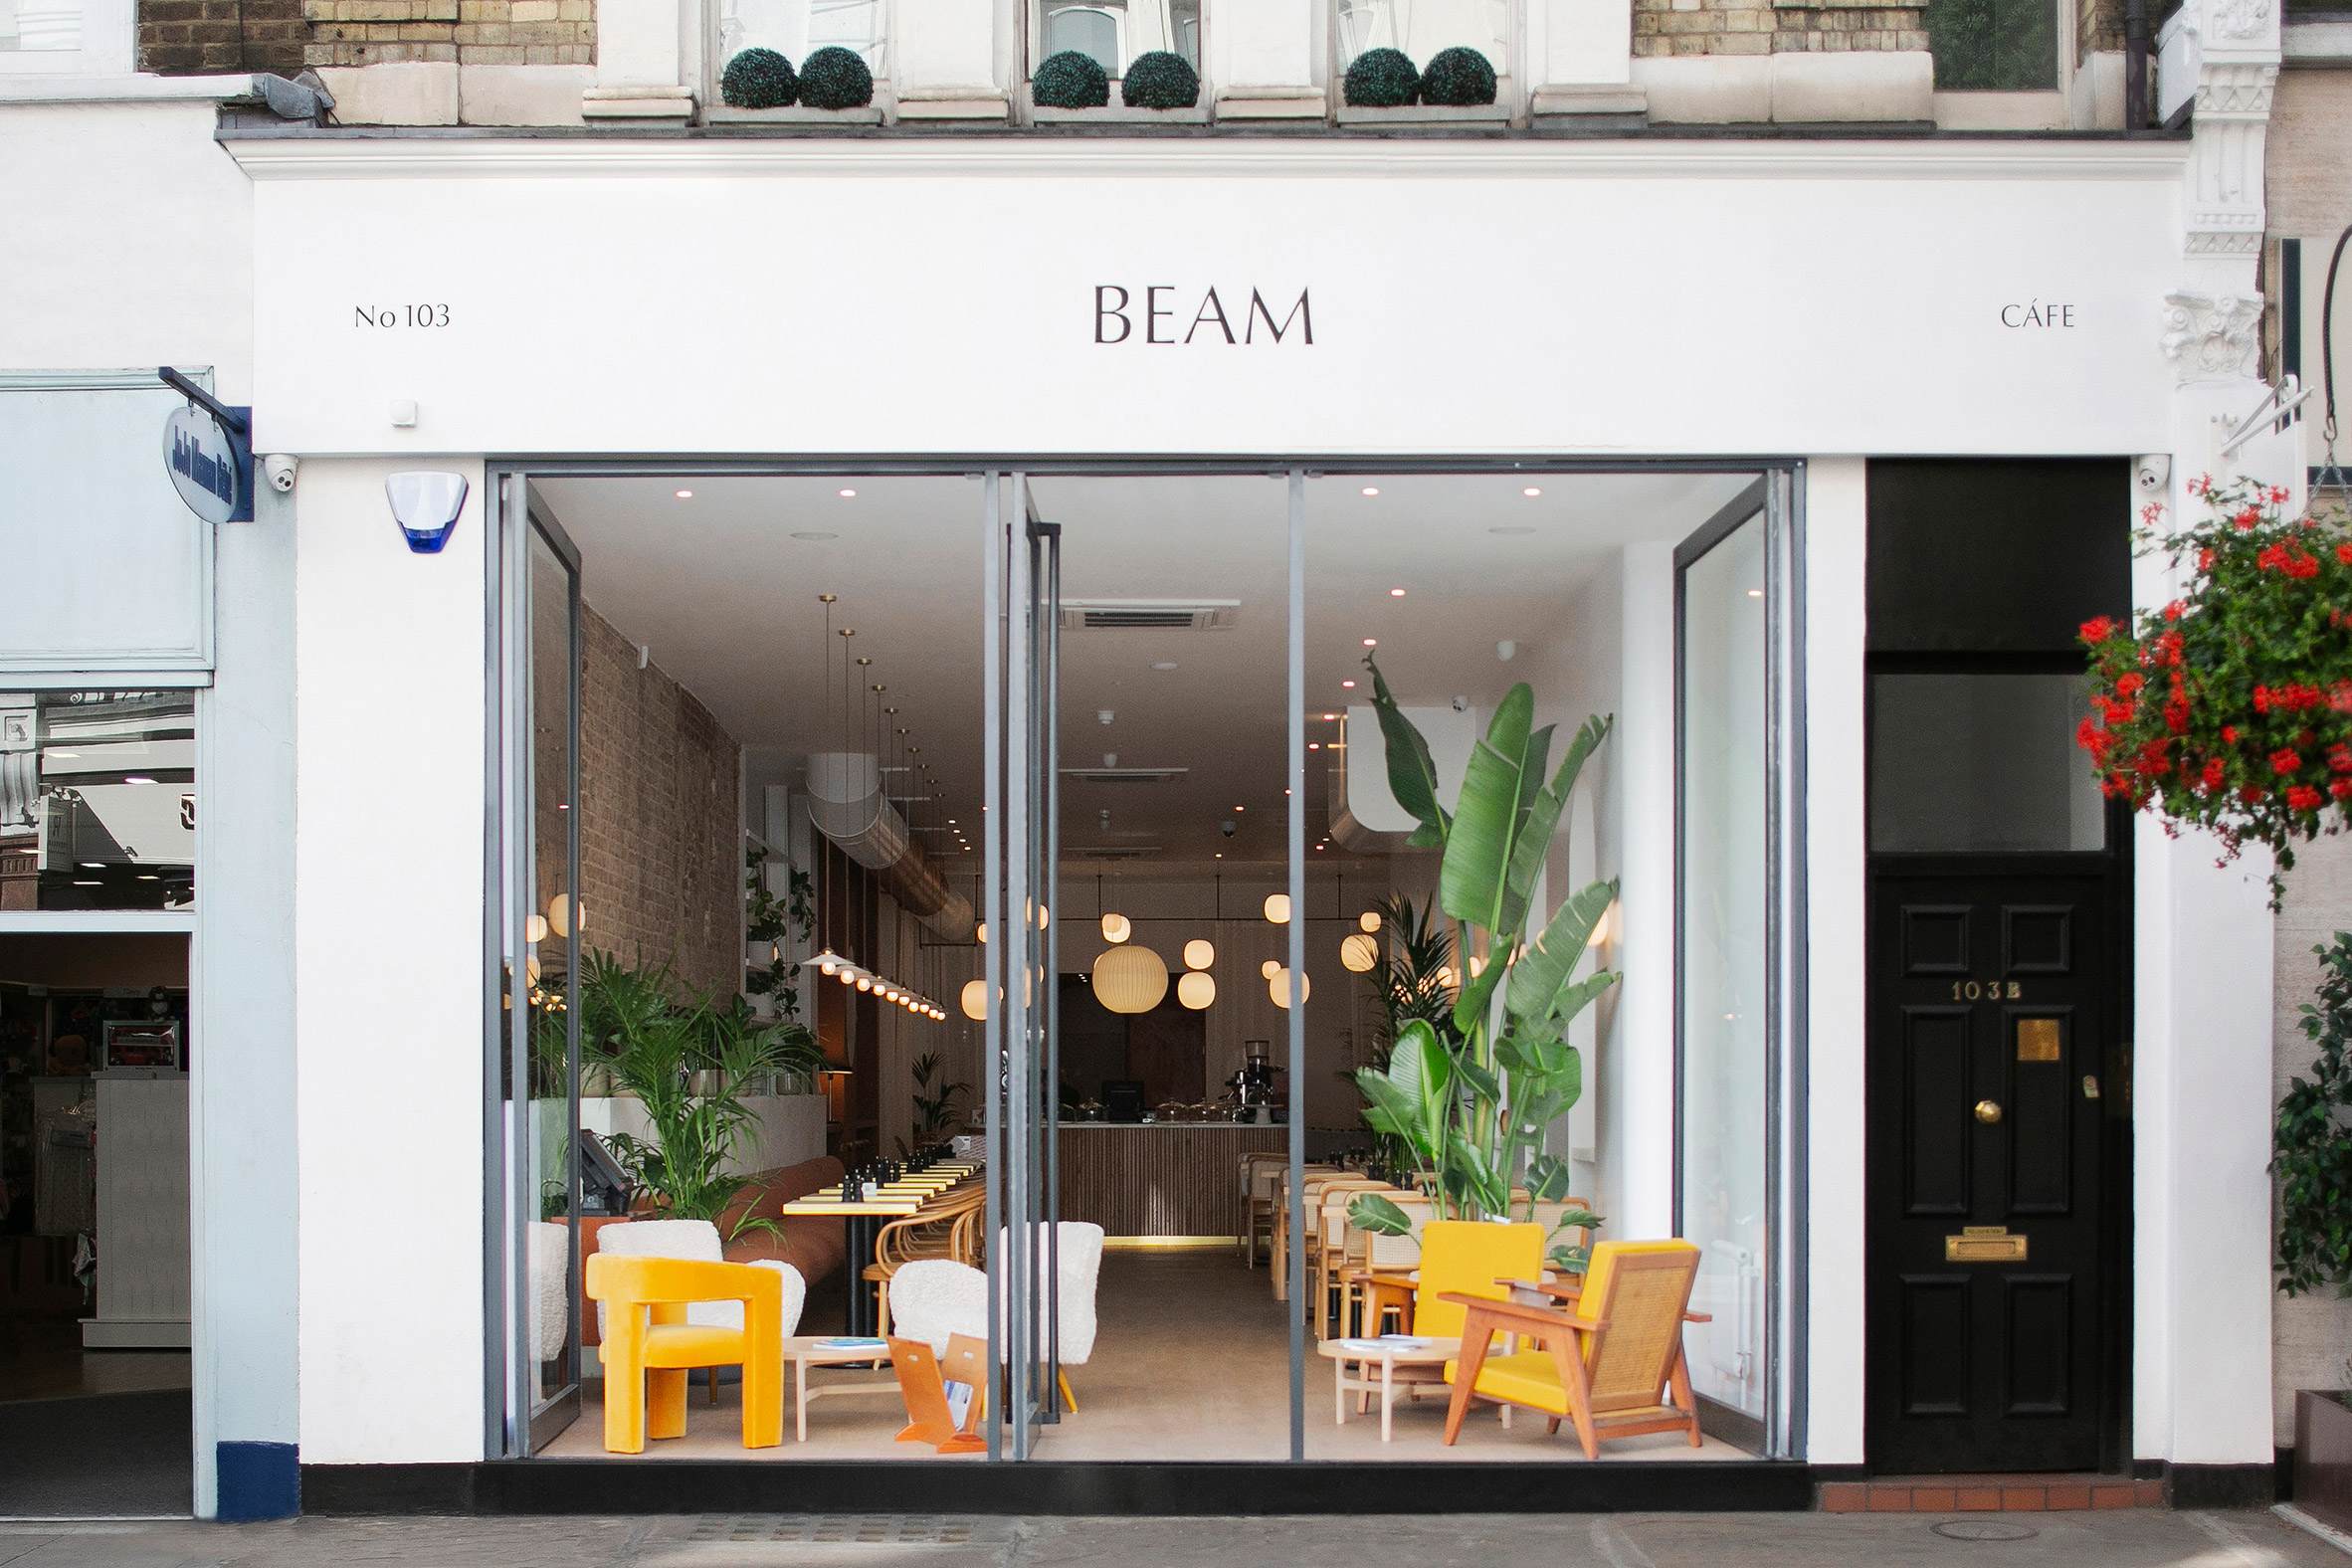 The exterior of Beam cafe in London